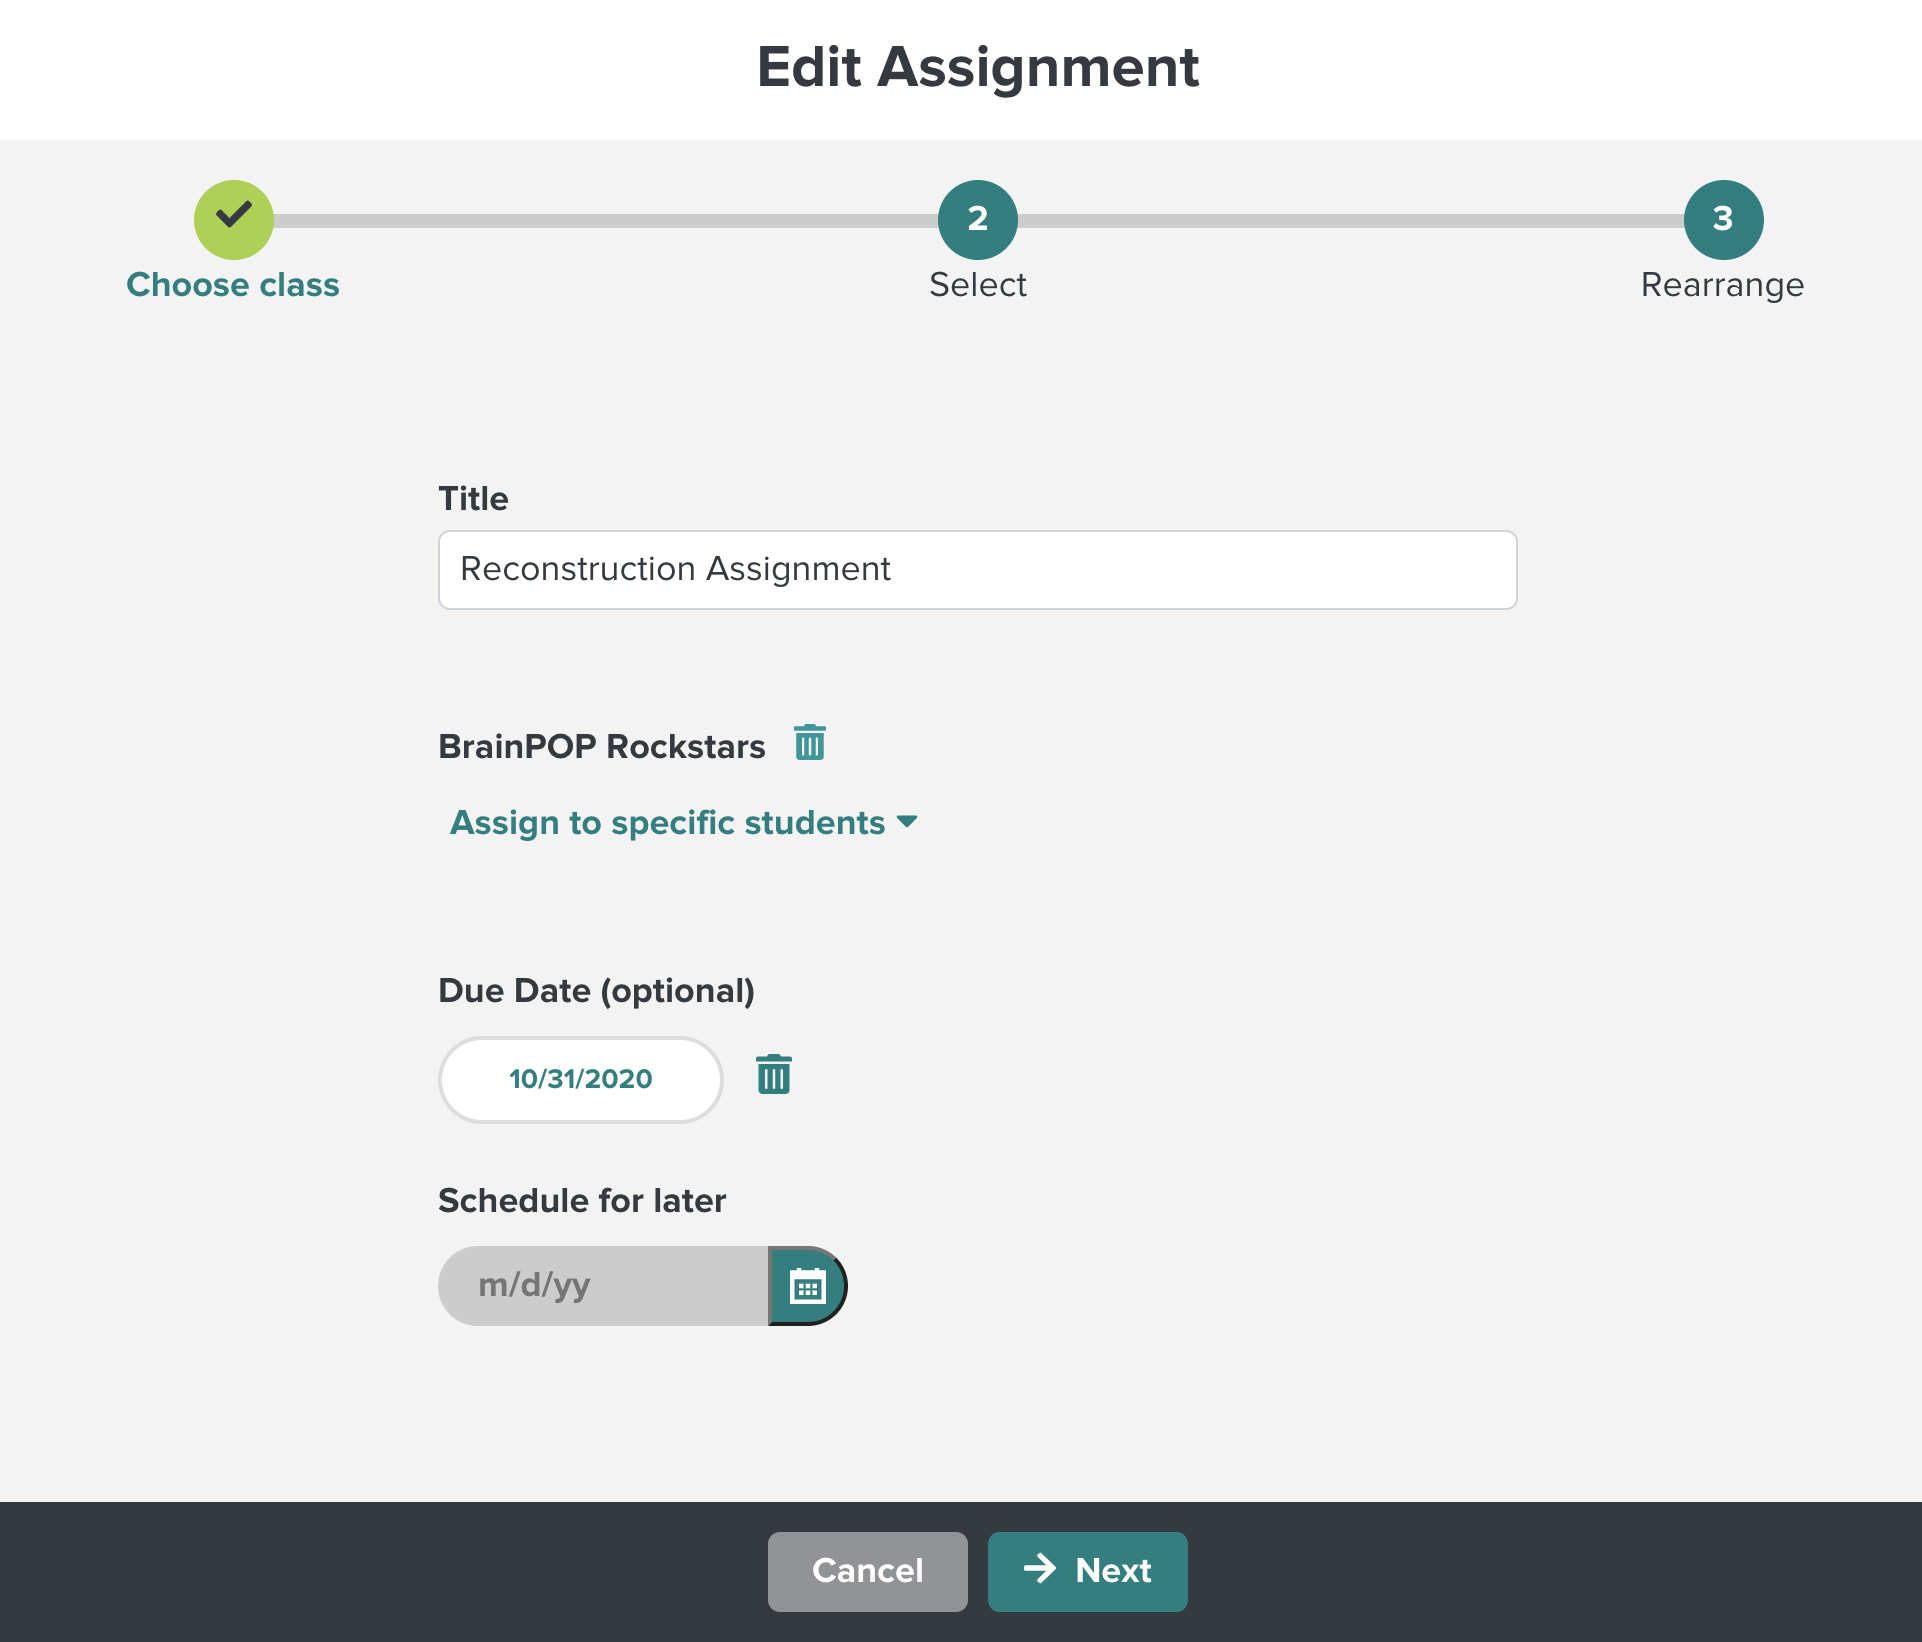 image of the assignment editor with the next button included